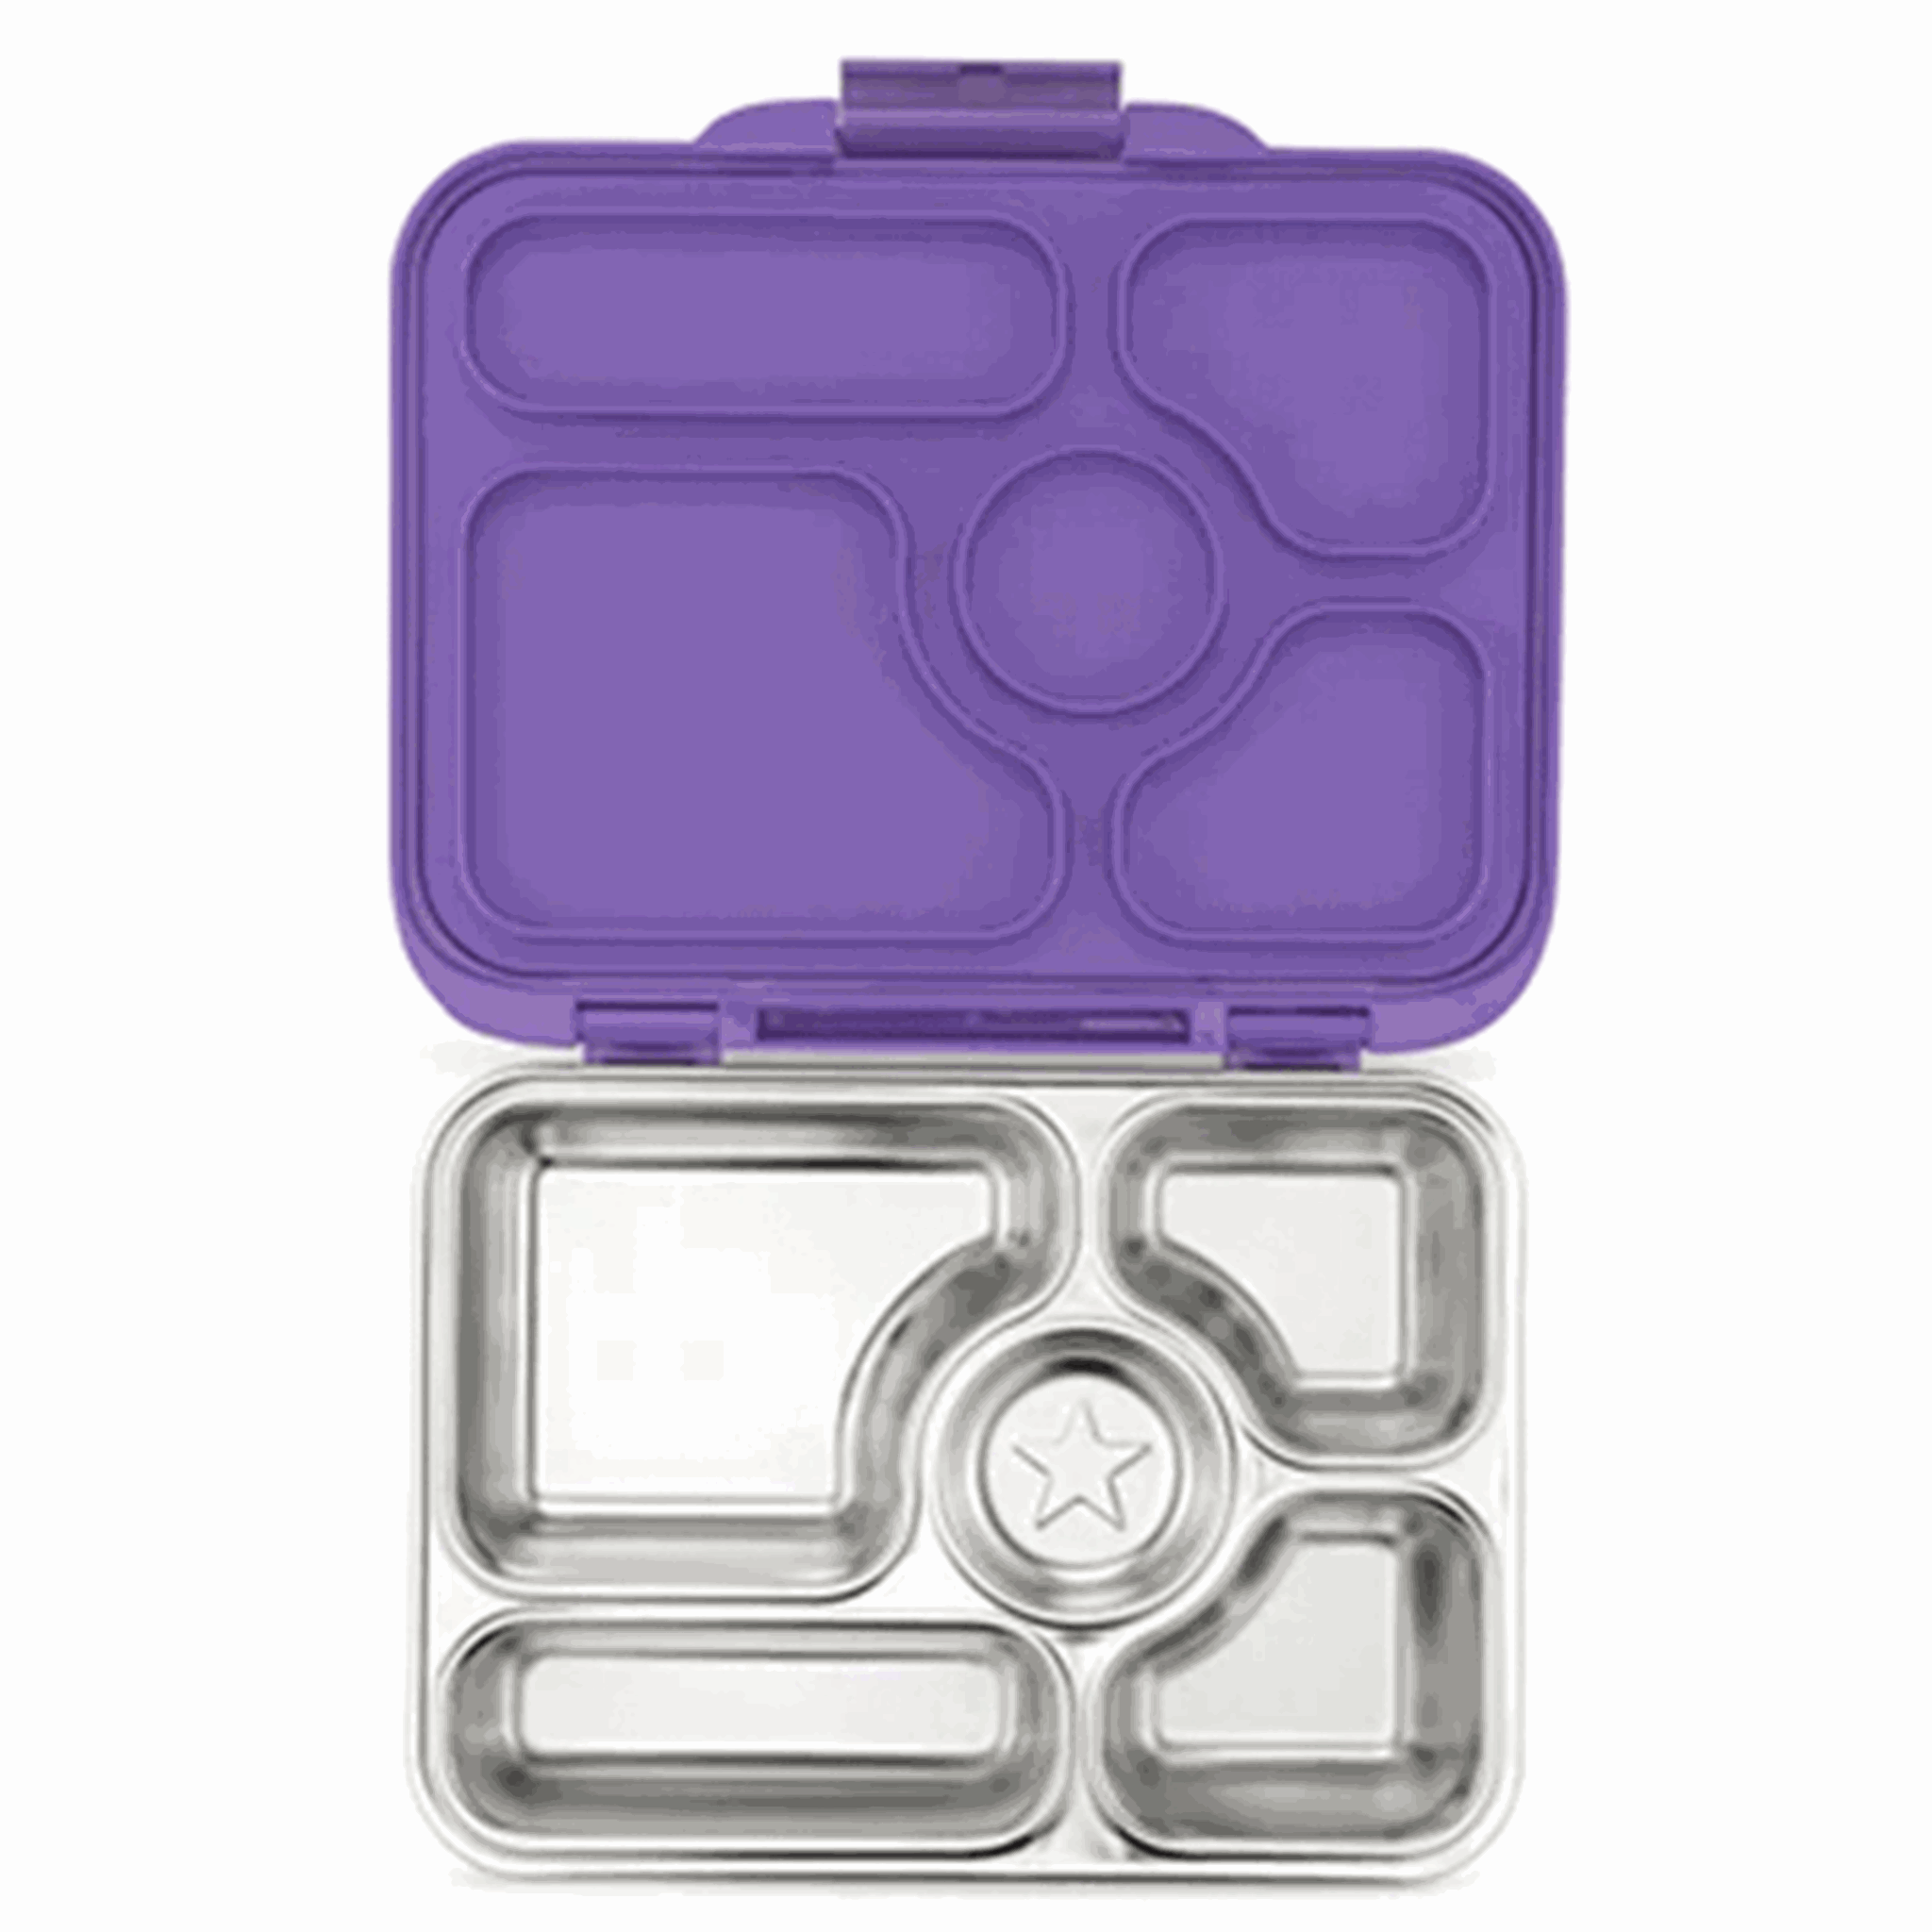 Yumbox Presto Stainless Steel Lunchlådor Remy Lavender 5